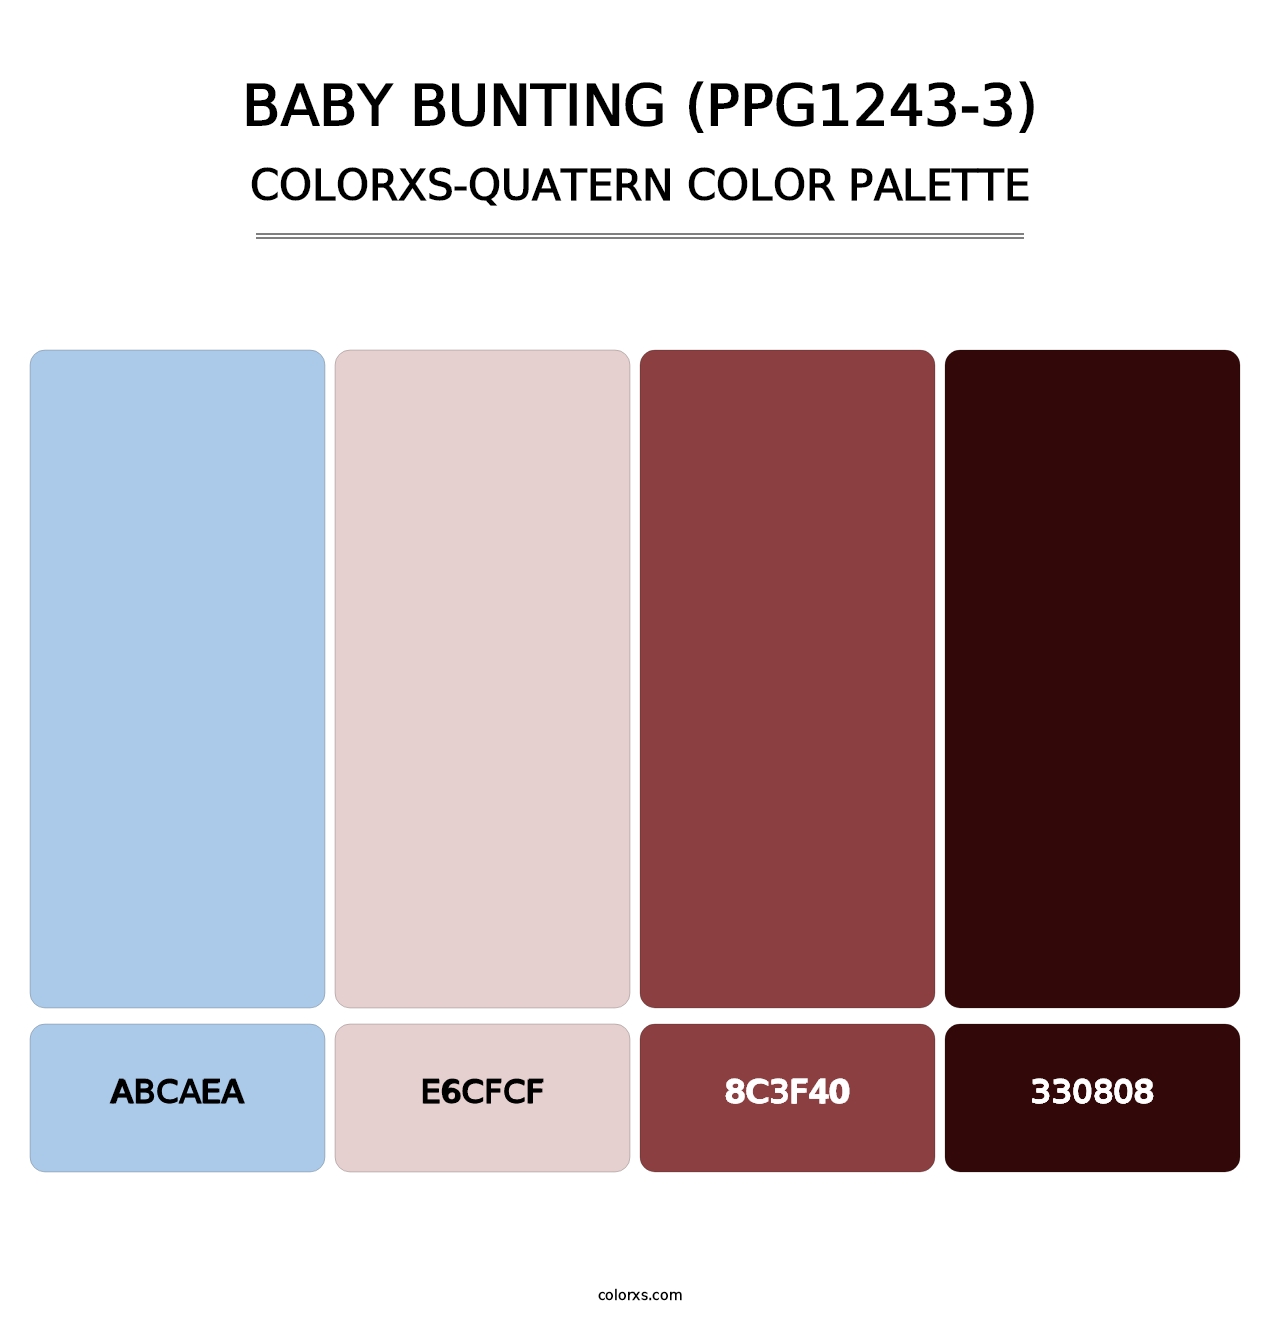 Baby Bunting (PPG1243-3) - Colorxs Quatern Palette